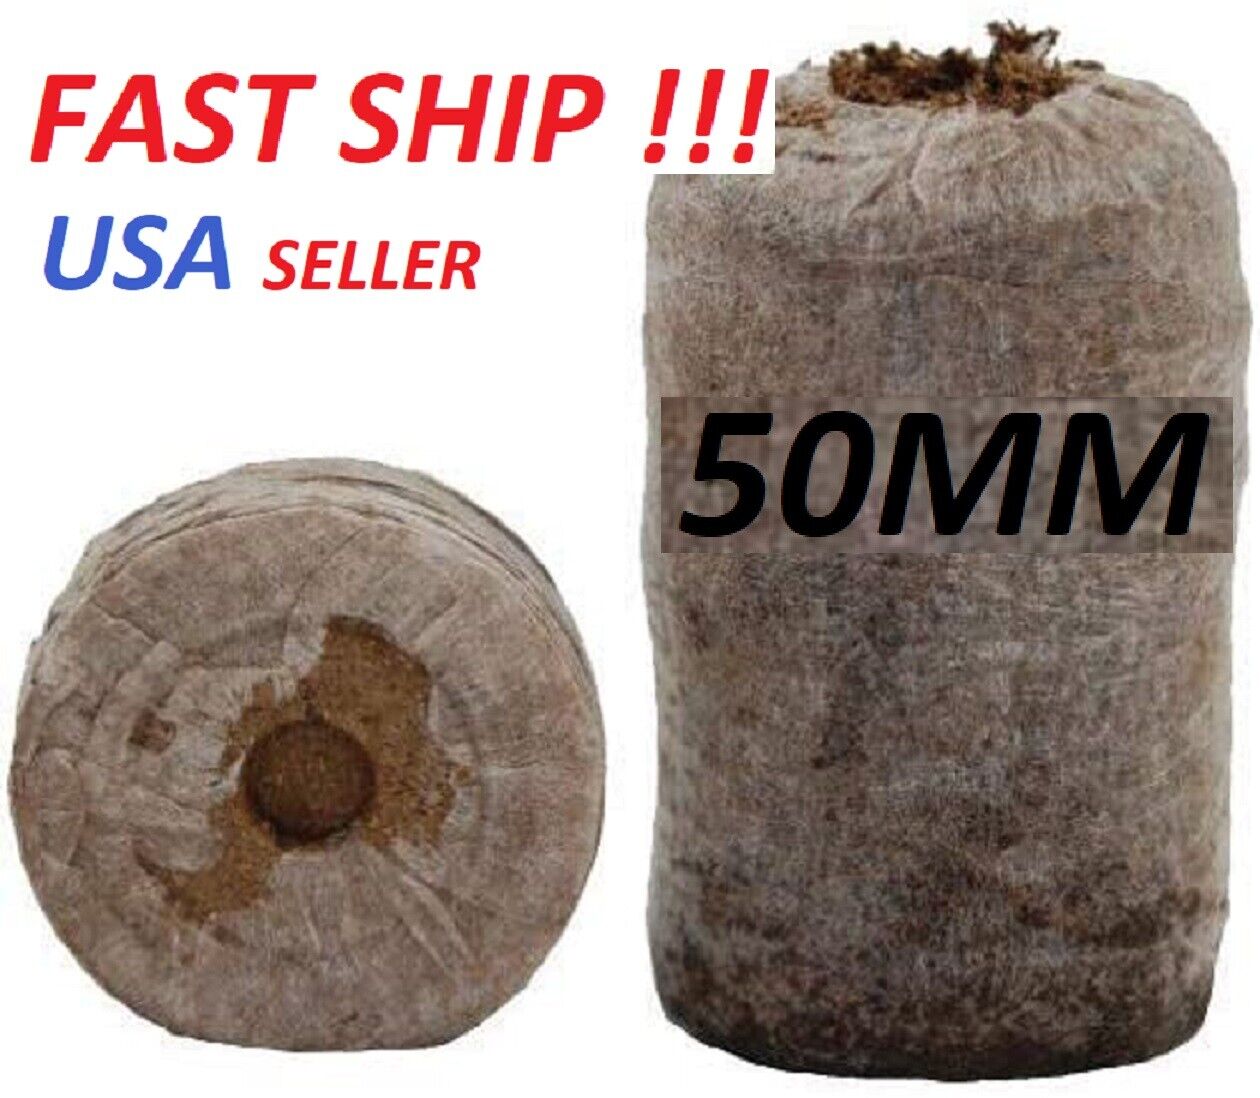 50mm Jiffy Peat Pellets, FAST SHIP Sold sets of 10,25,50,100,486 Seed Starting